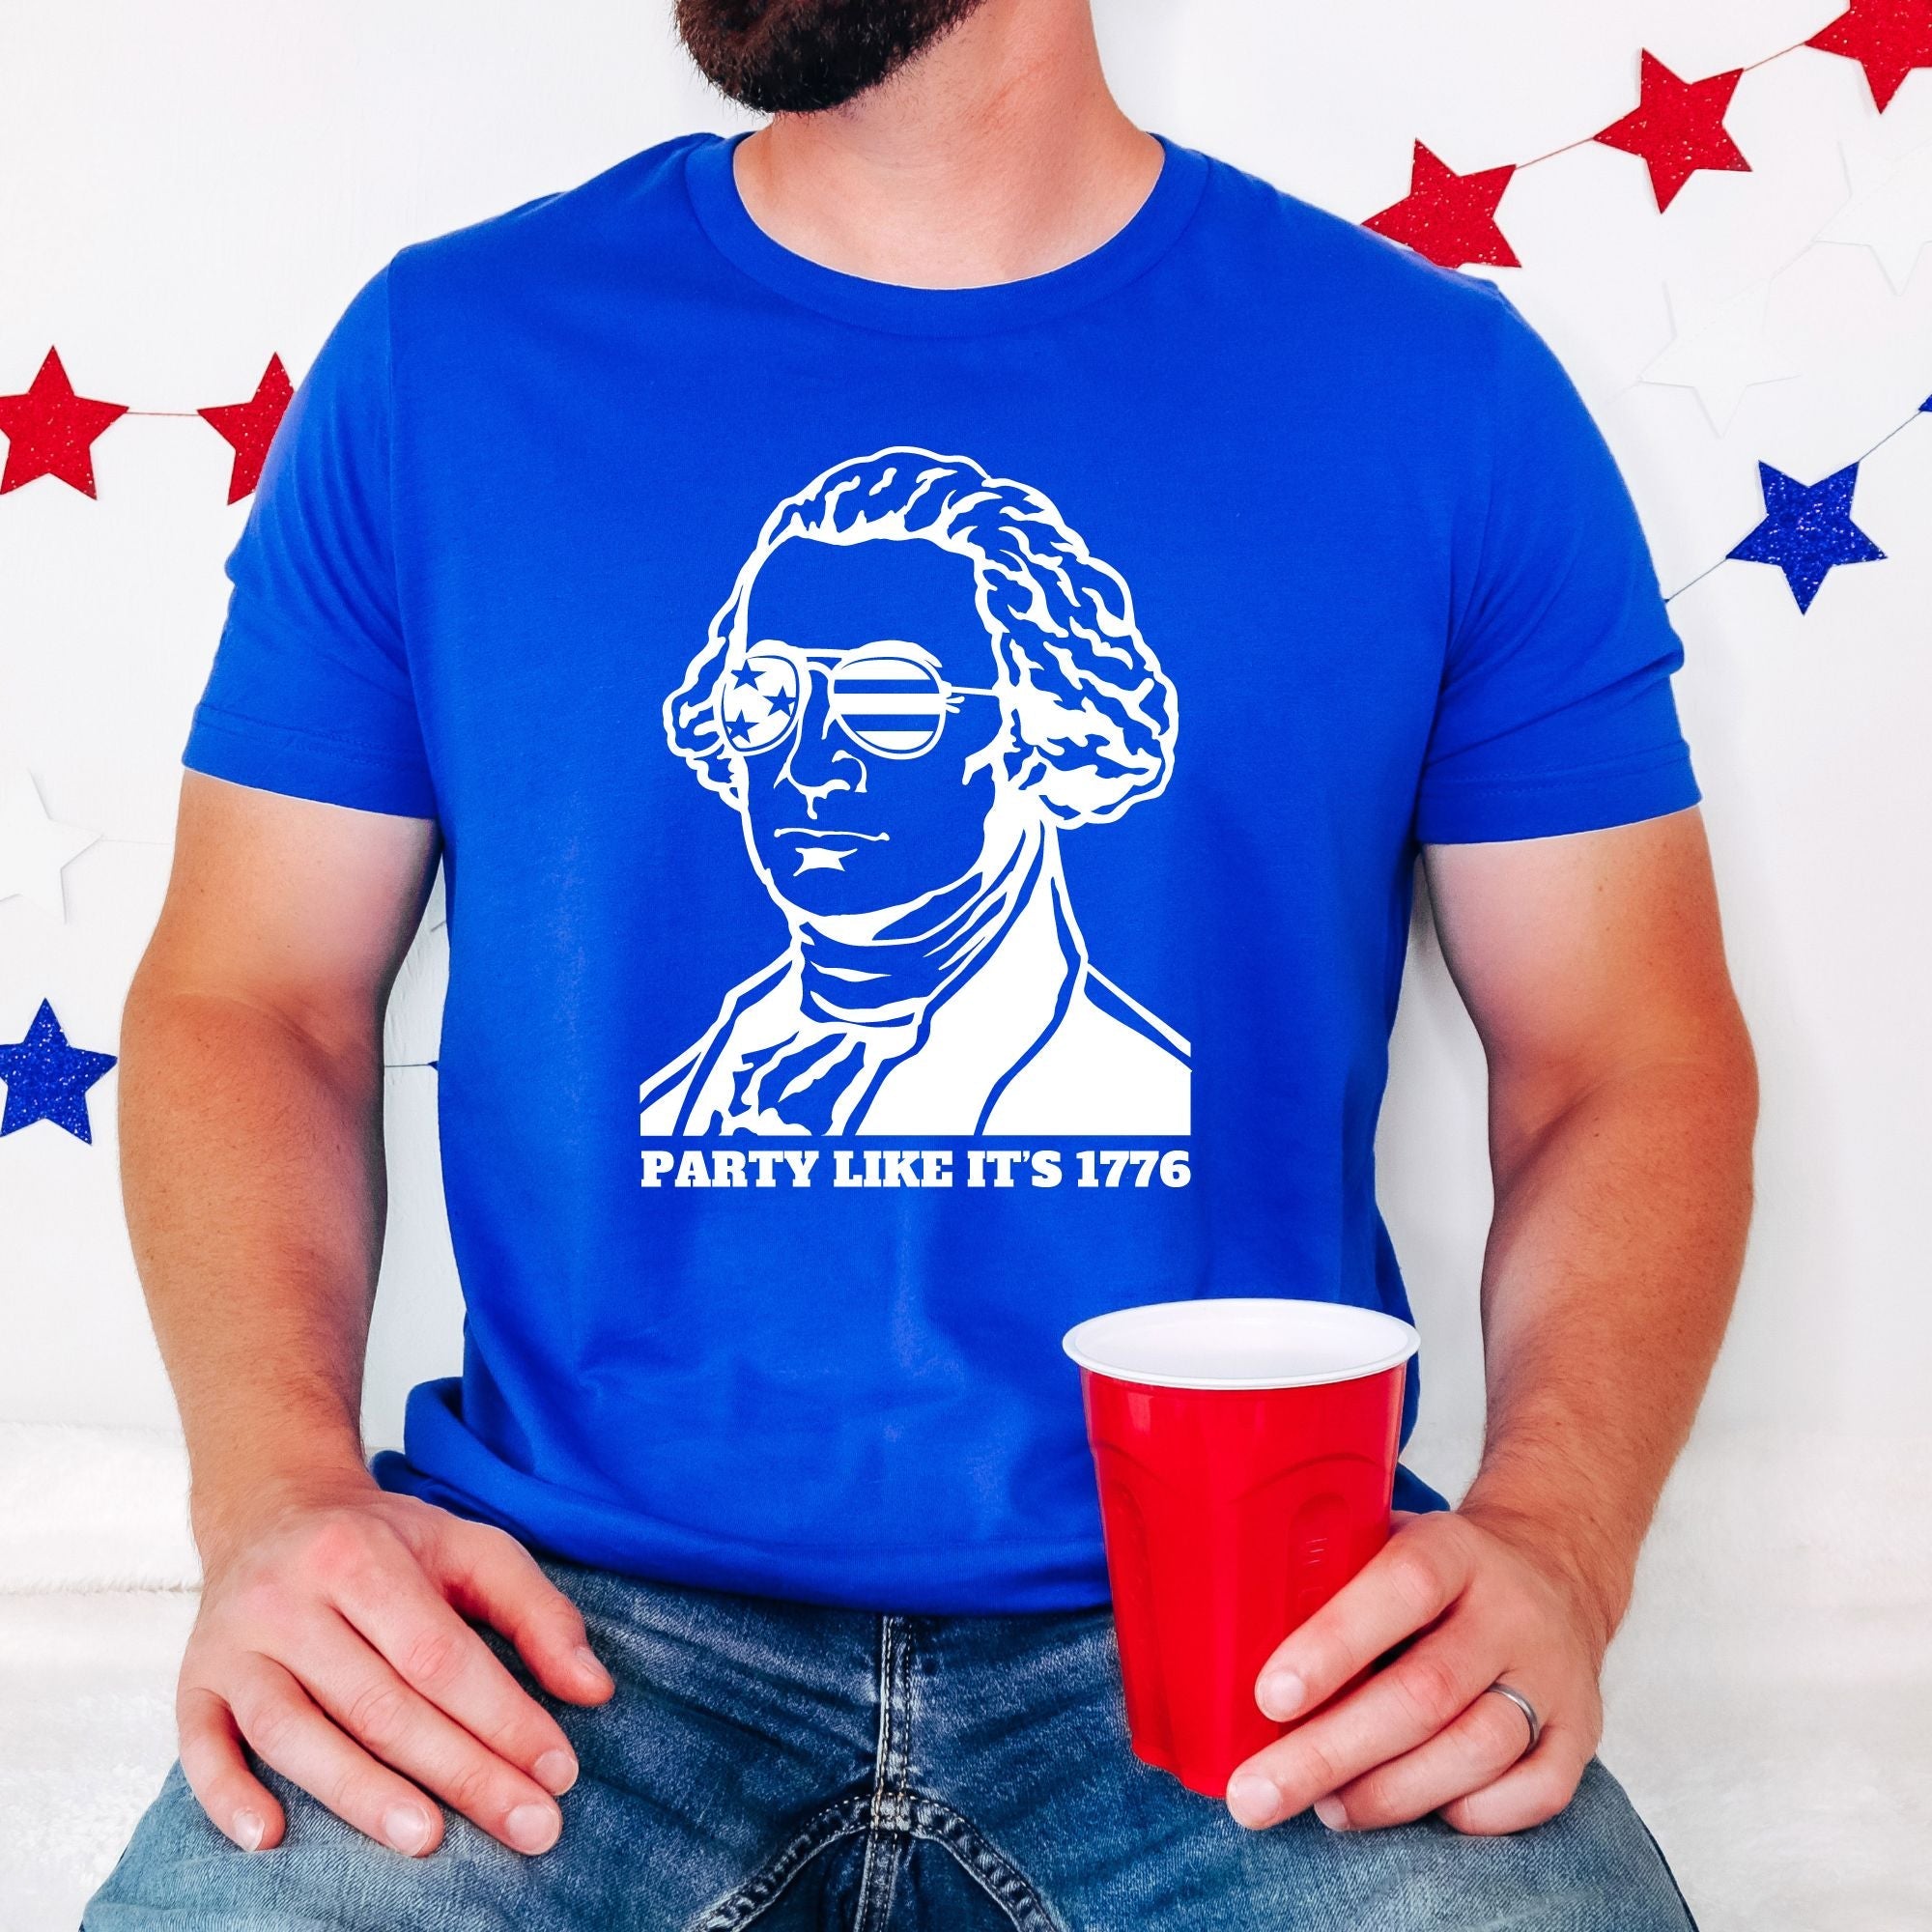 Party Like It's 1776 T Shirt for 4th Of July *UNISEX FIT*-Graphic Tees-208 Tees Wholesale, Idaho